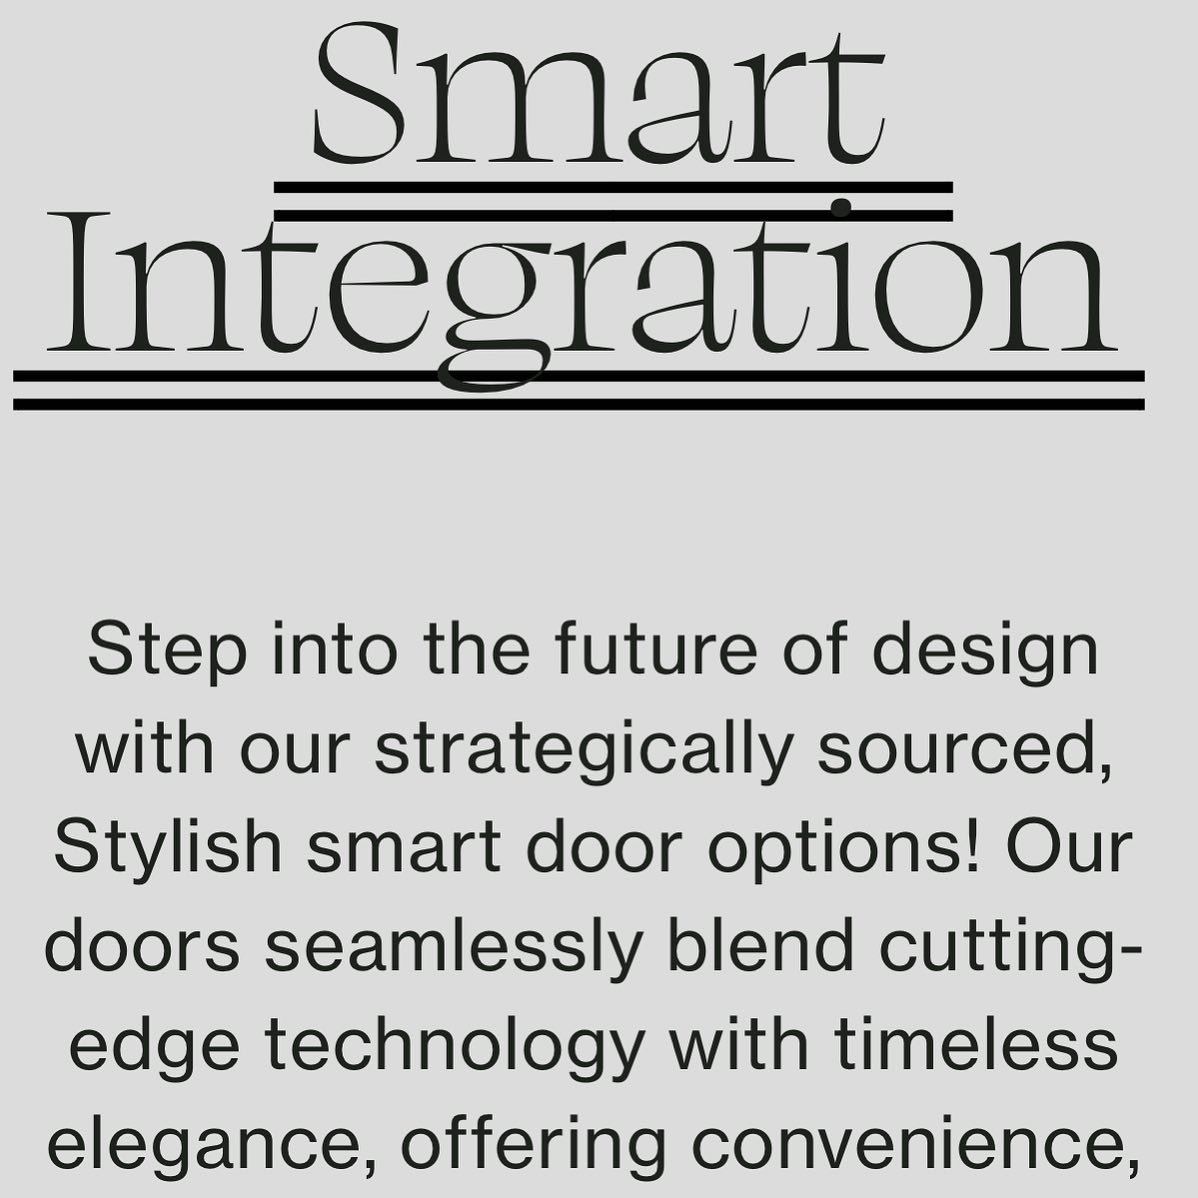 Smart and Stylish, our strategically sourced smart door options offer a seamlessly blend of cutting-edge technology with timeless elegance, offering convenience, security, and beauty in one sleek package. Experience the next evolution of door design 